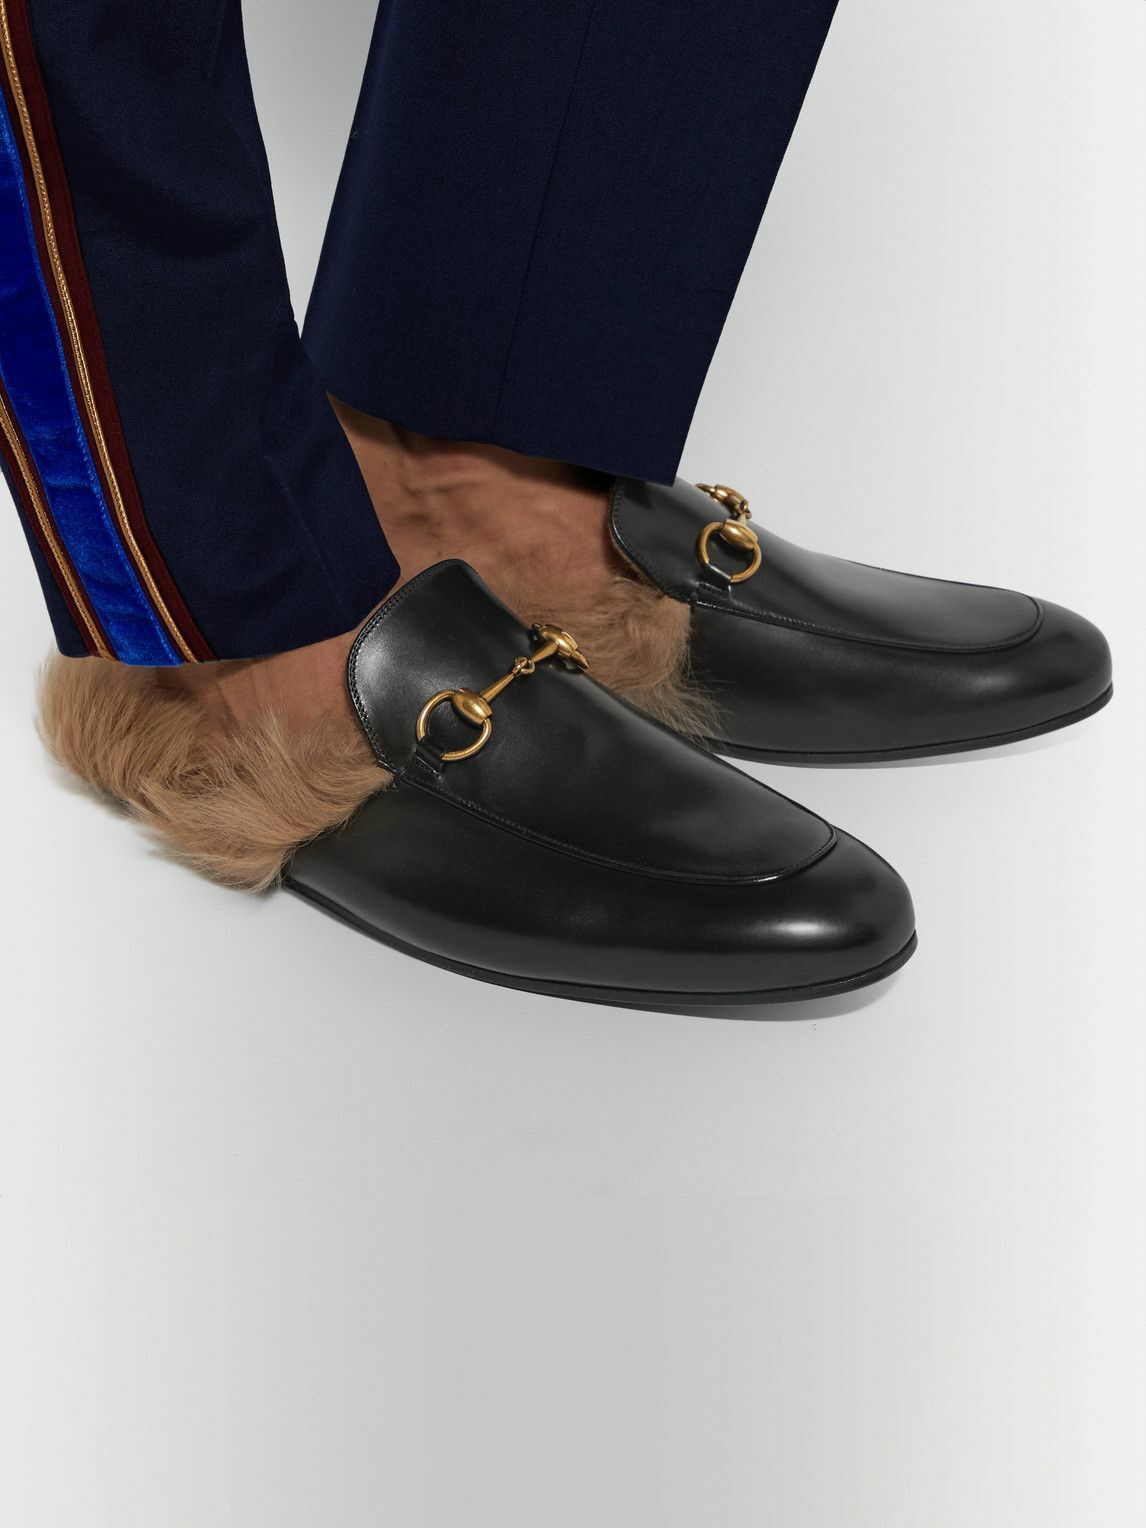 GUCCI Princetown Horsebit Leather Backless Loafers Black Gucci